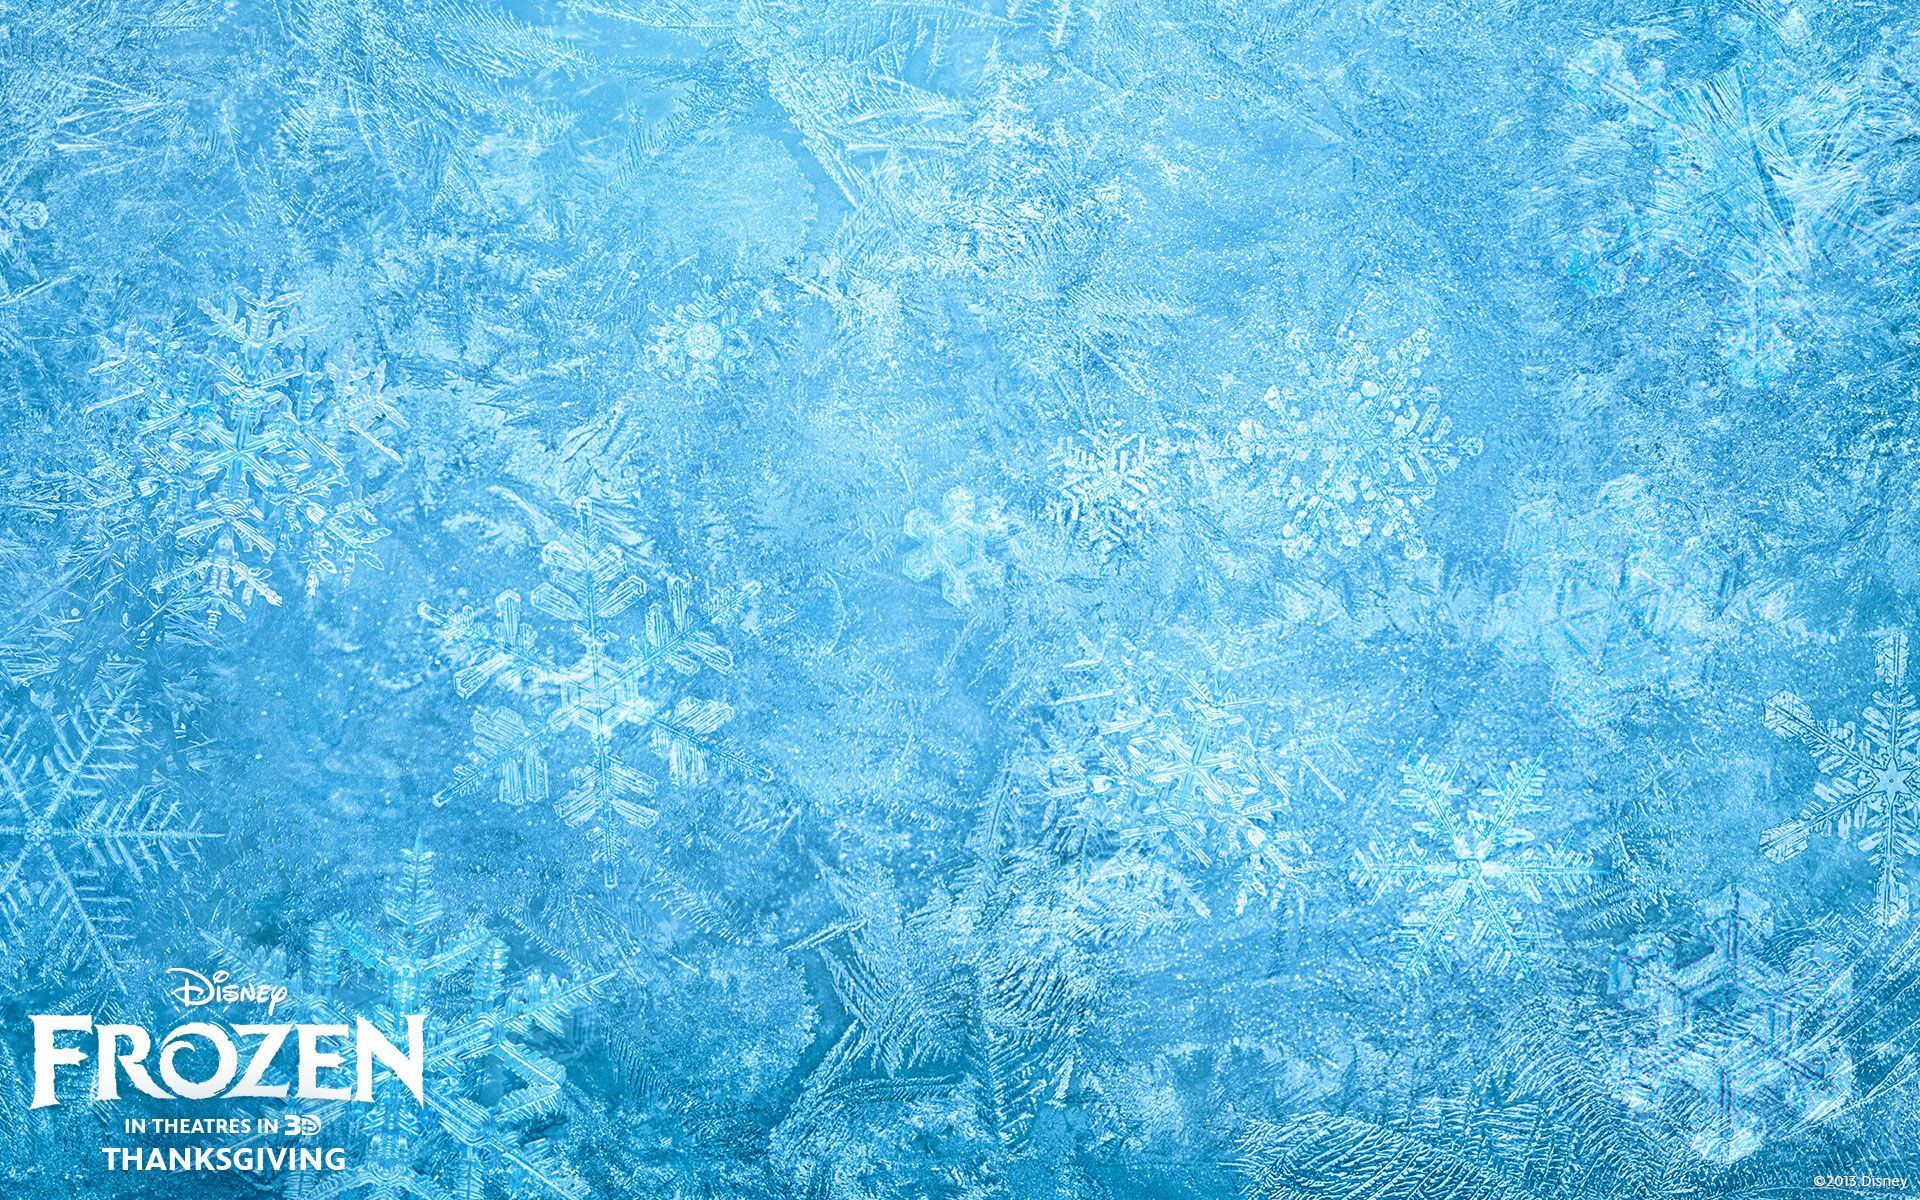 Frozen 2013 Movie Wallpapers [HD] & Facebook Timeline Covers